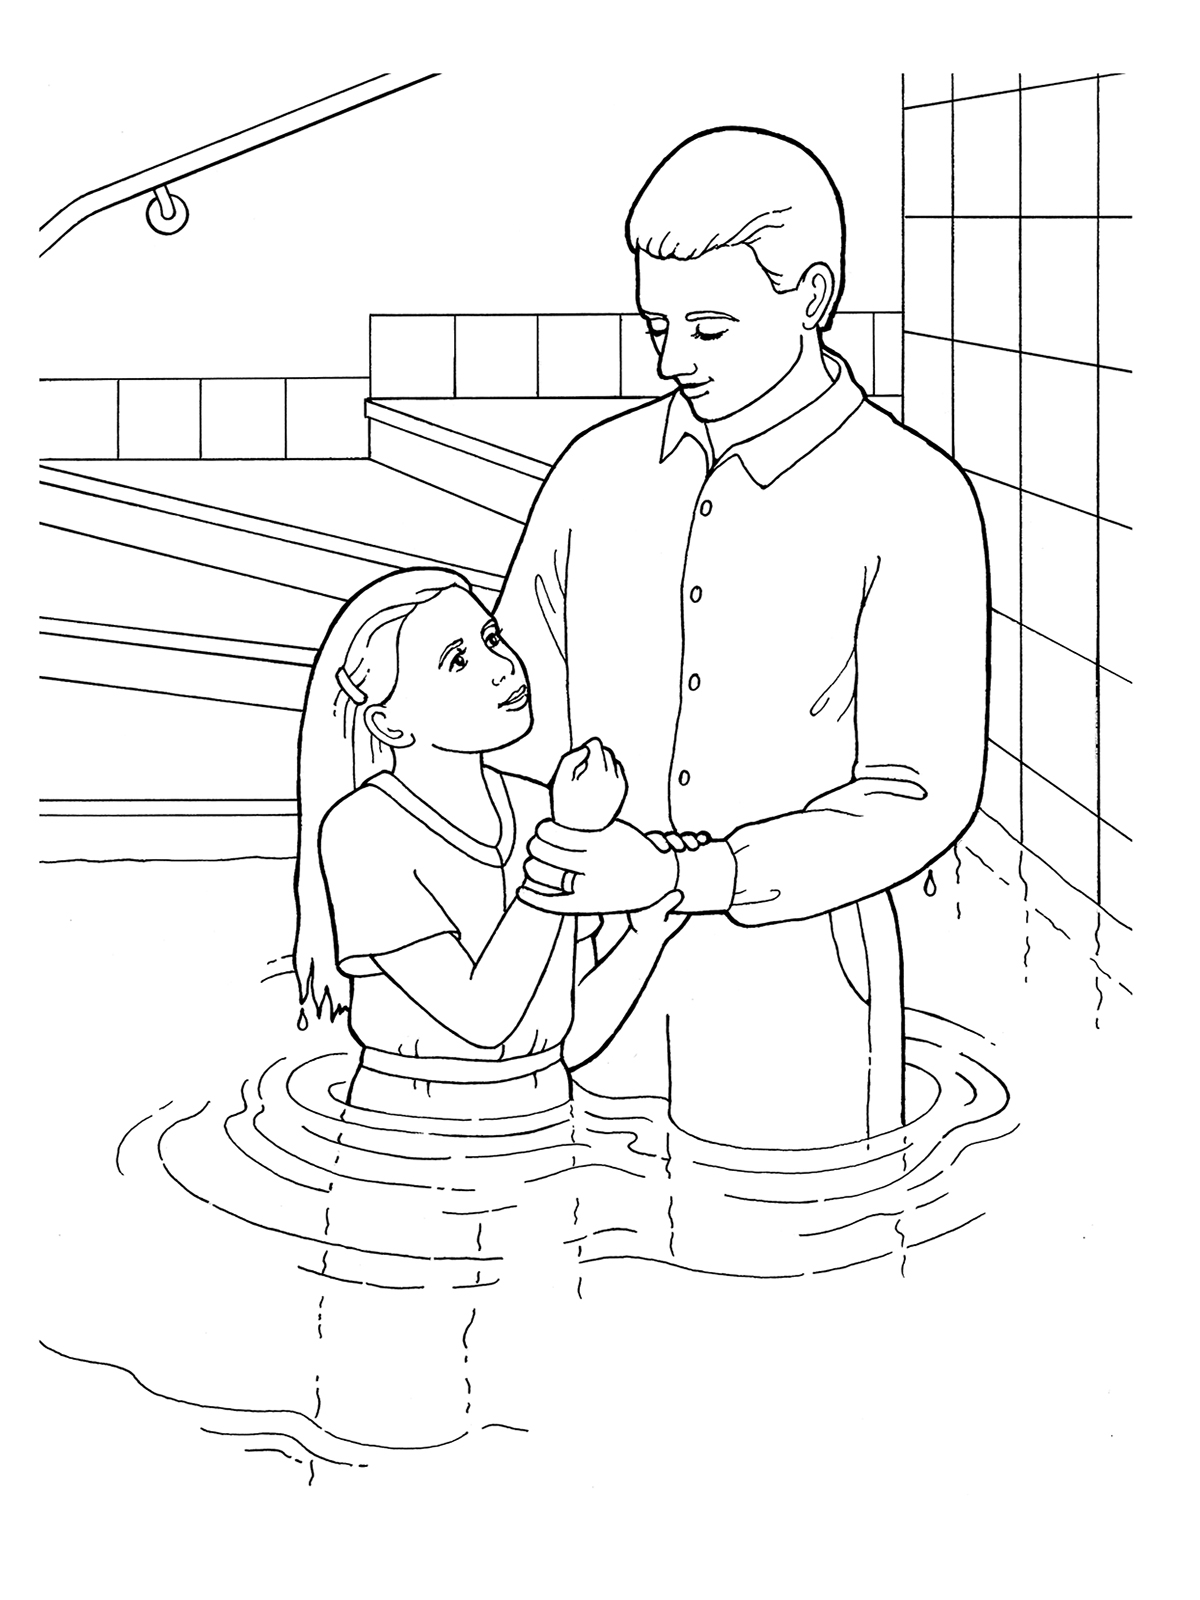 Baptism Coloring Pages Printable Pdf - Free Printable Baptism Coloring Pages